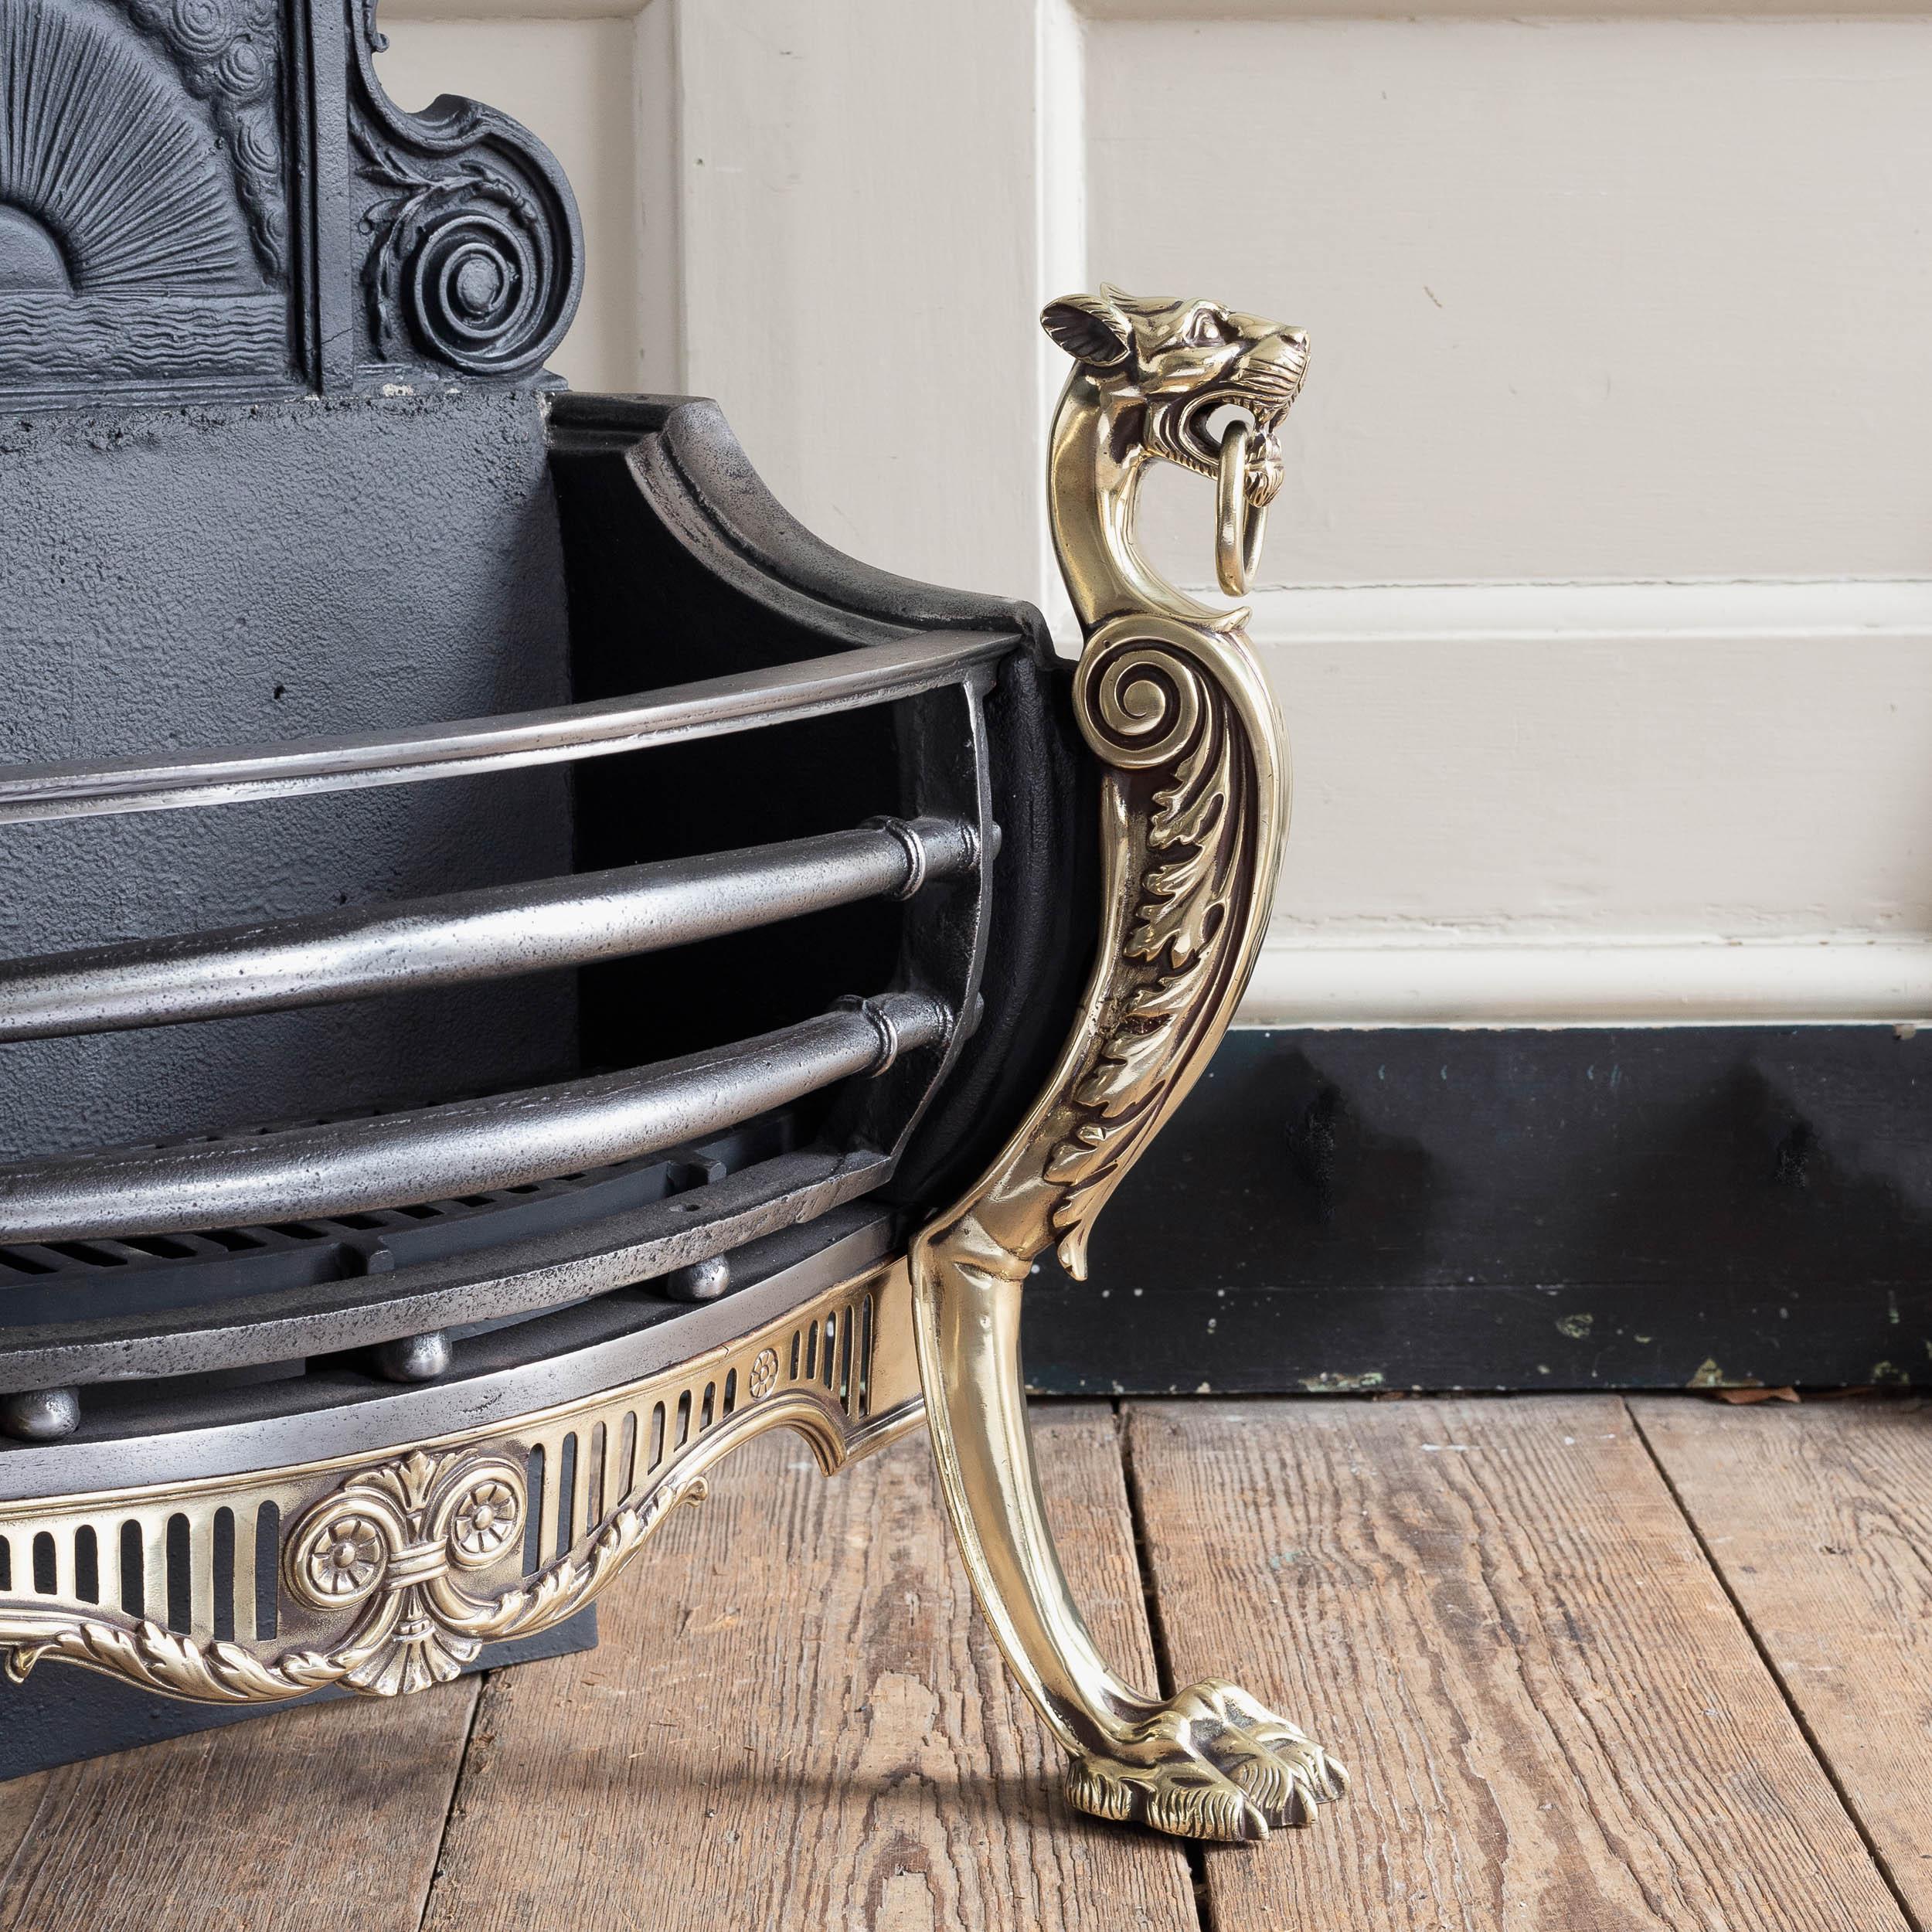 Mid-Victorian cast iron and brass fire grate with decorative backplate and Panther monopodia standards flanking the railed basket.

Restored, re-polished and ready to use immediately.